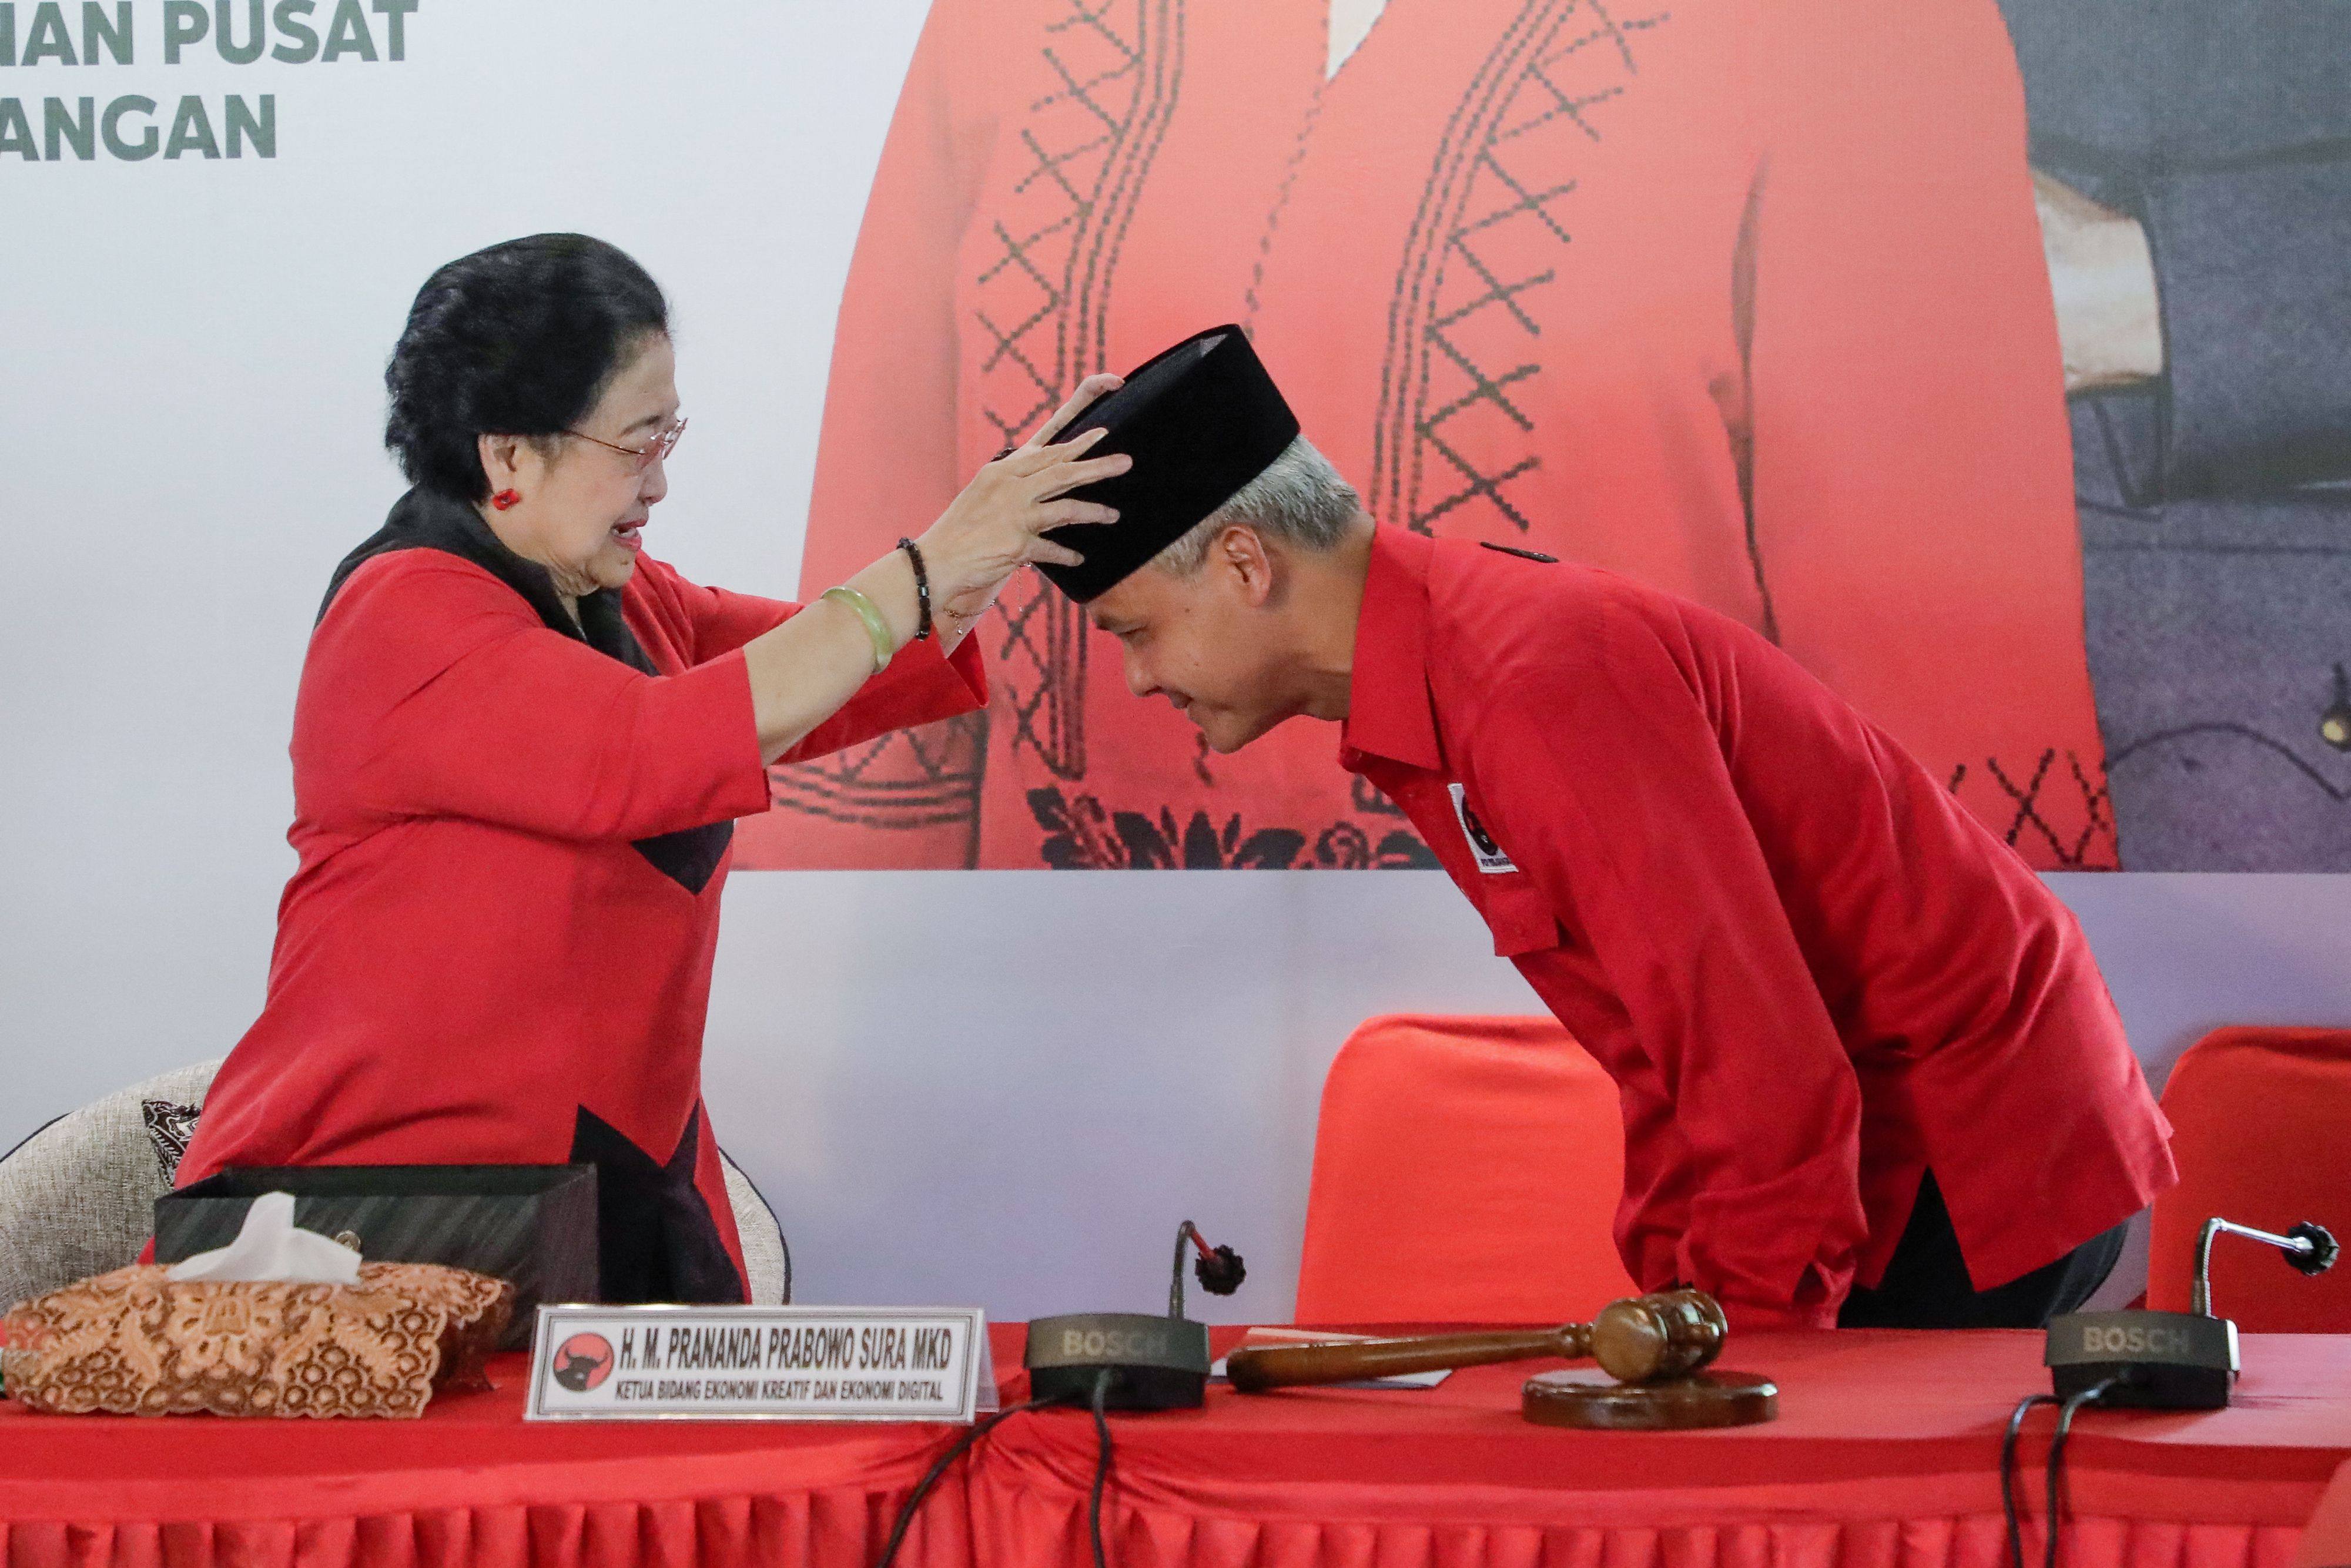 Ganjar (right) secured the endorsement of Megawati Sukarnoputri, chairwoman of the Democratic Party of Struggle last month. Photo: AFP